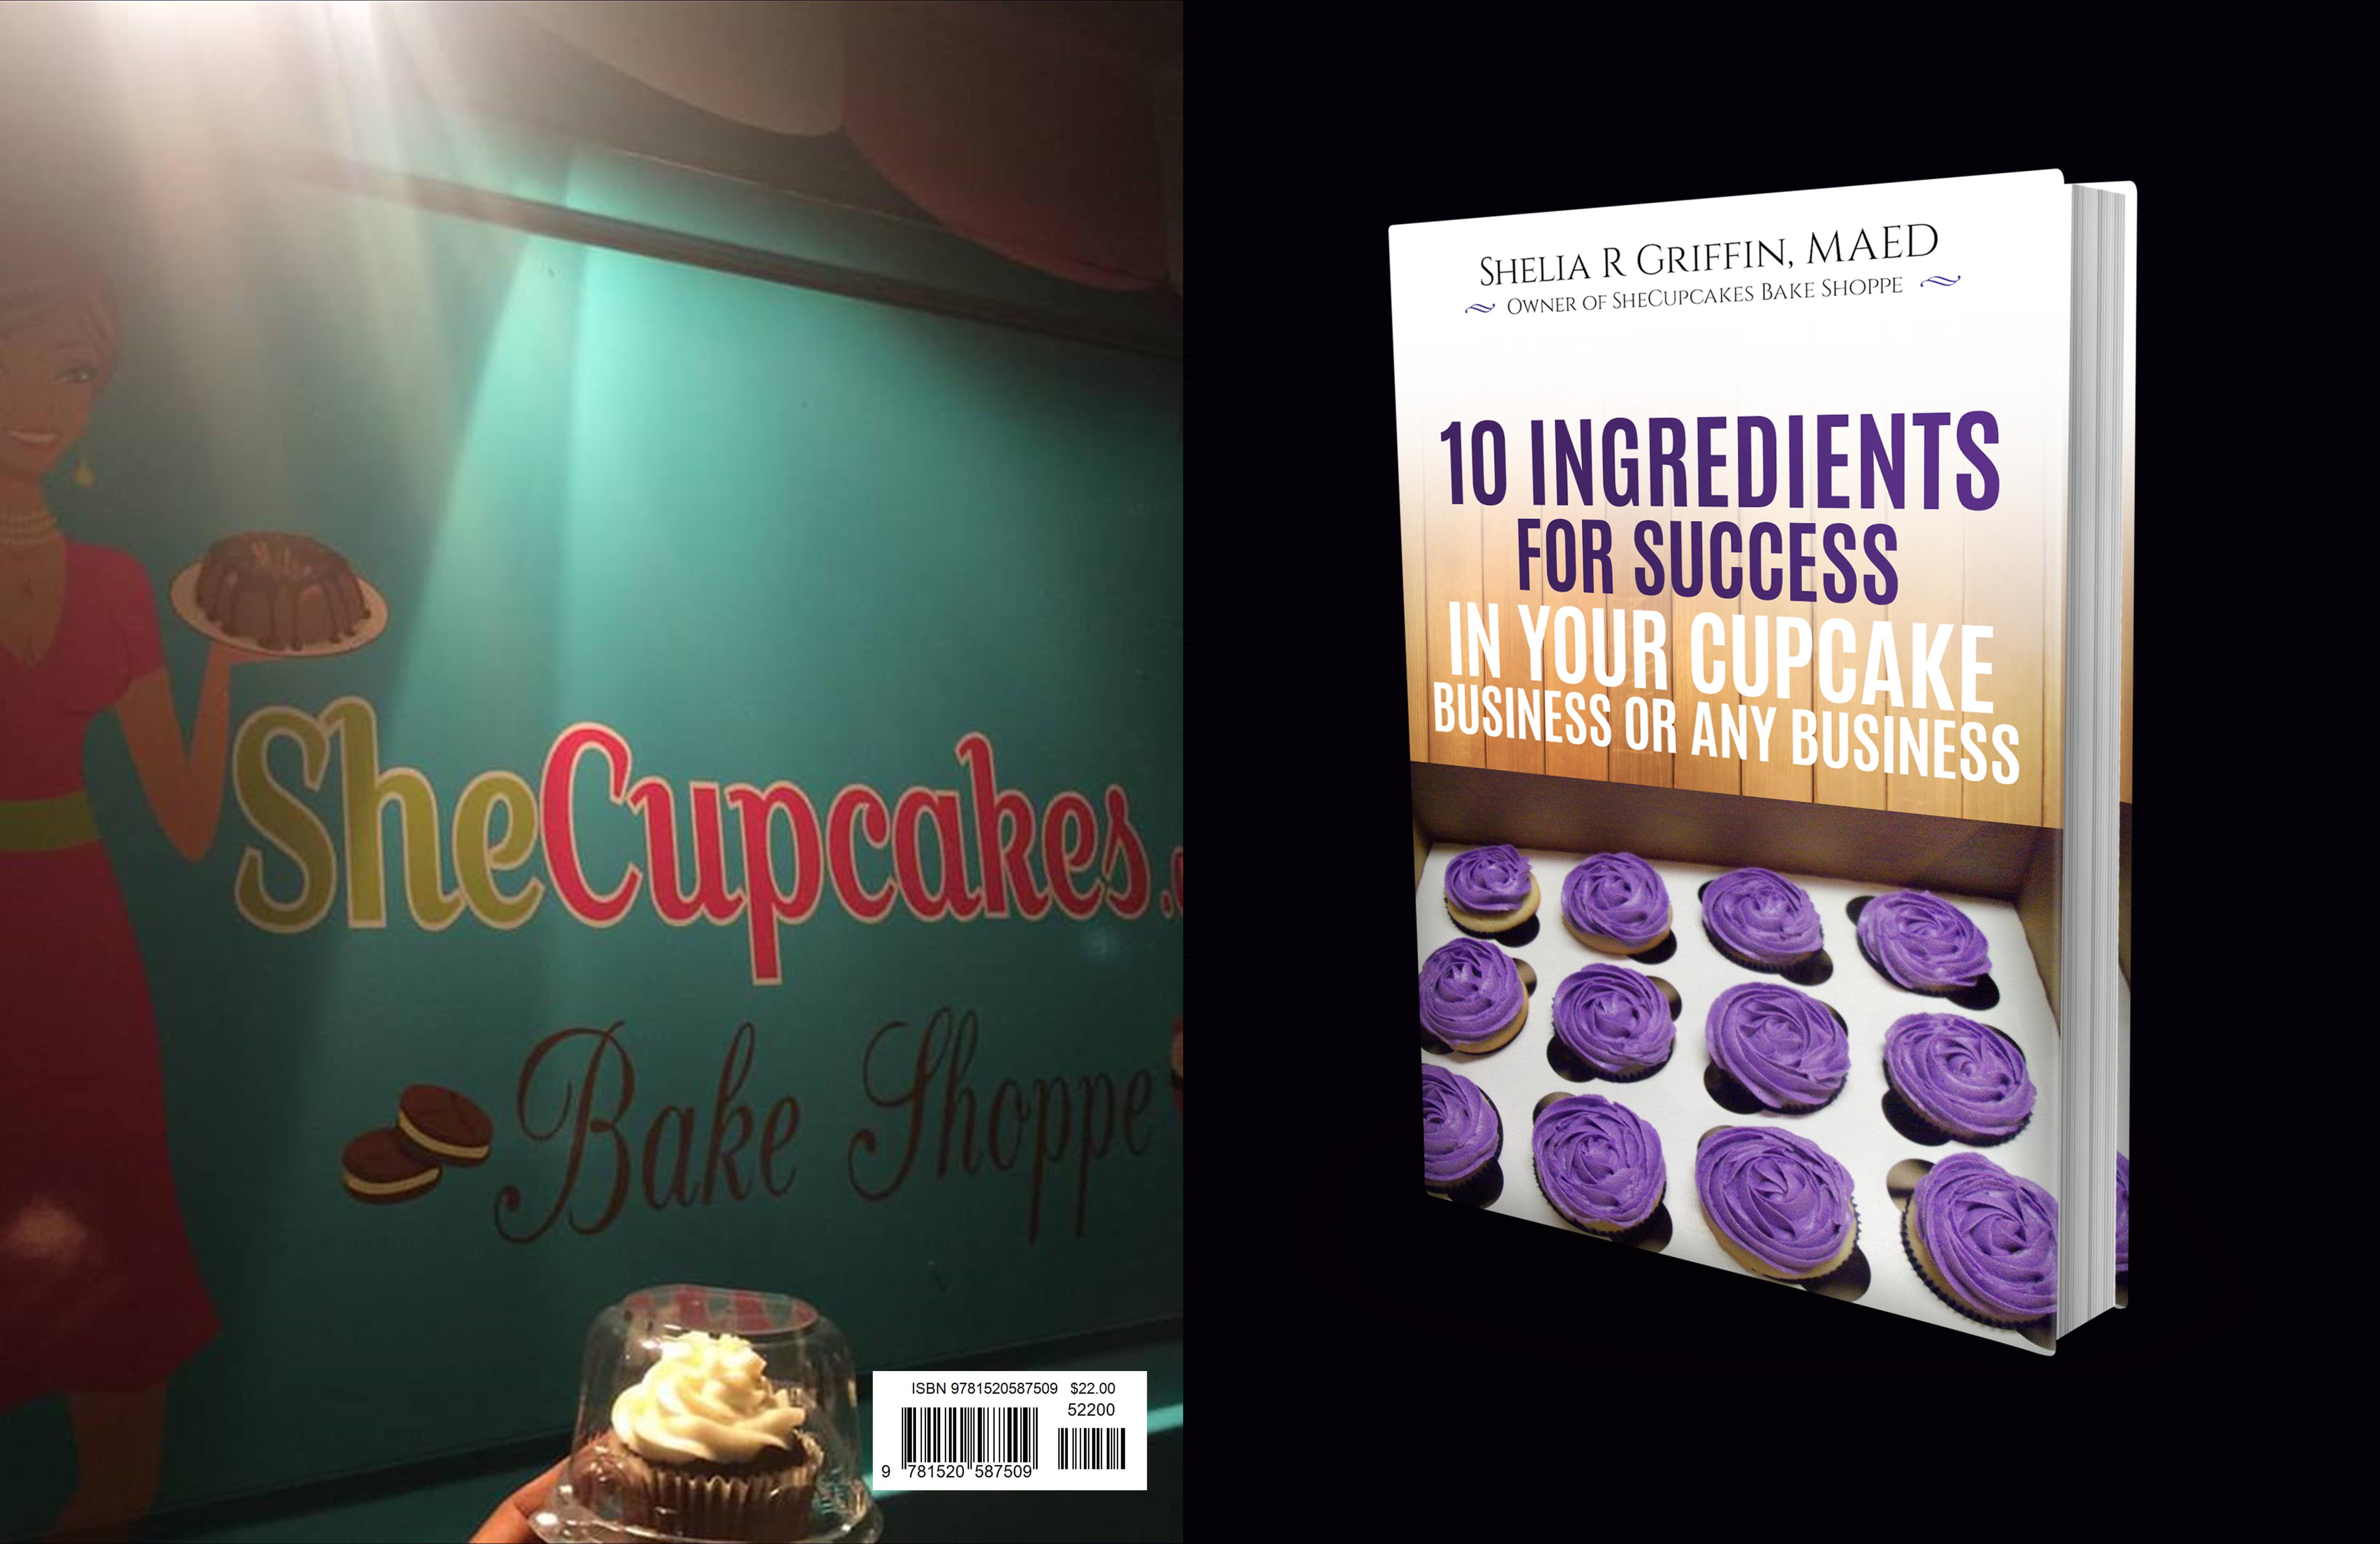 10 Ingredients For Success In Your Cupcake Business Or Any Business cover image